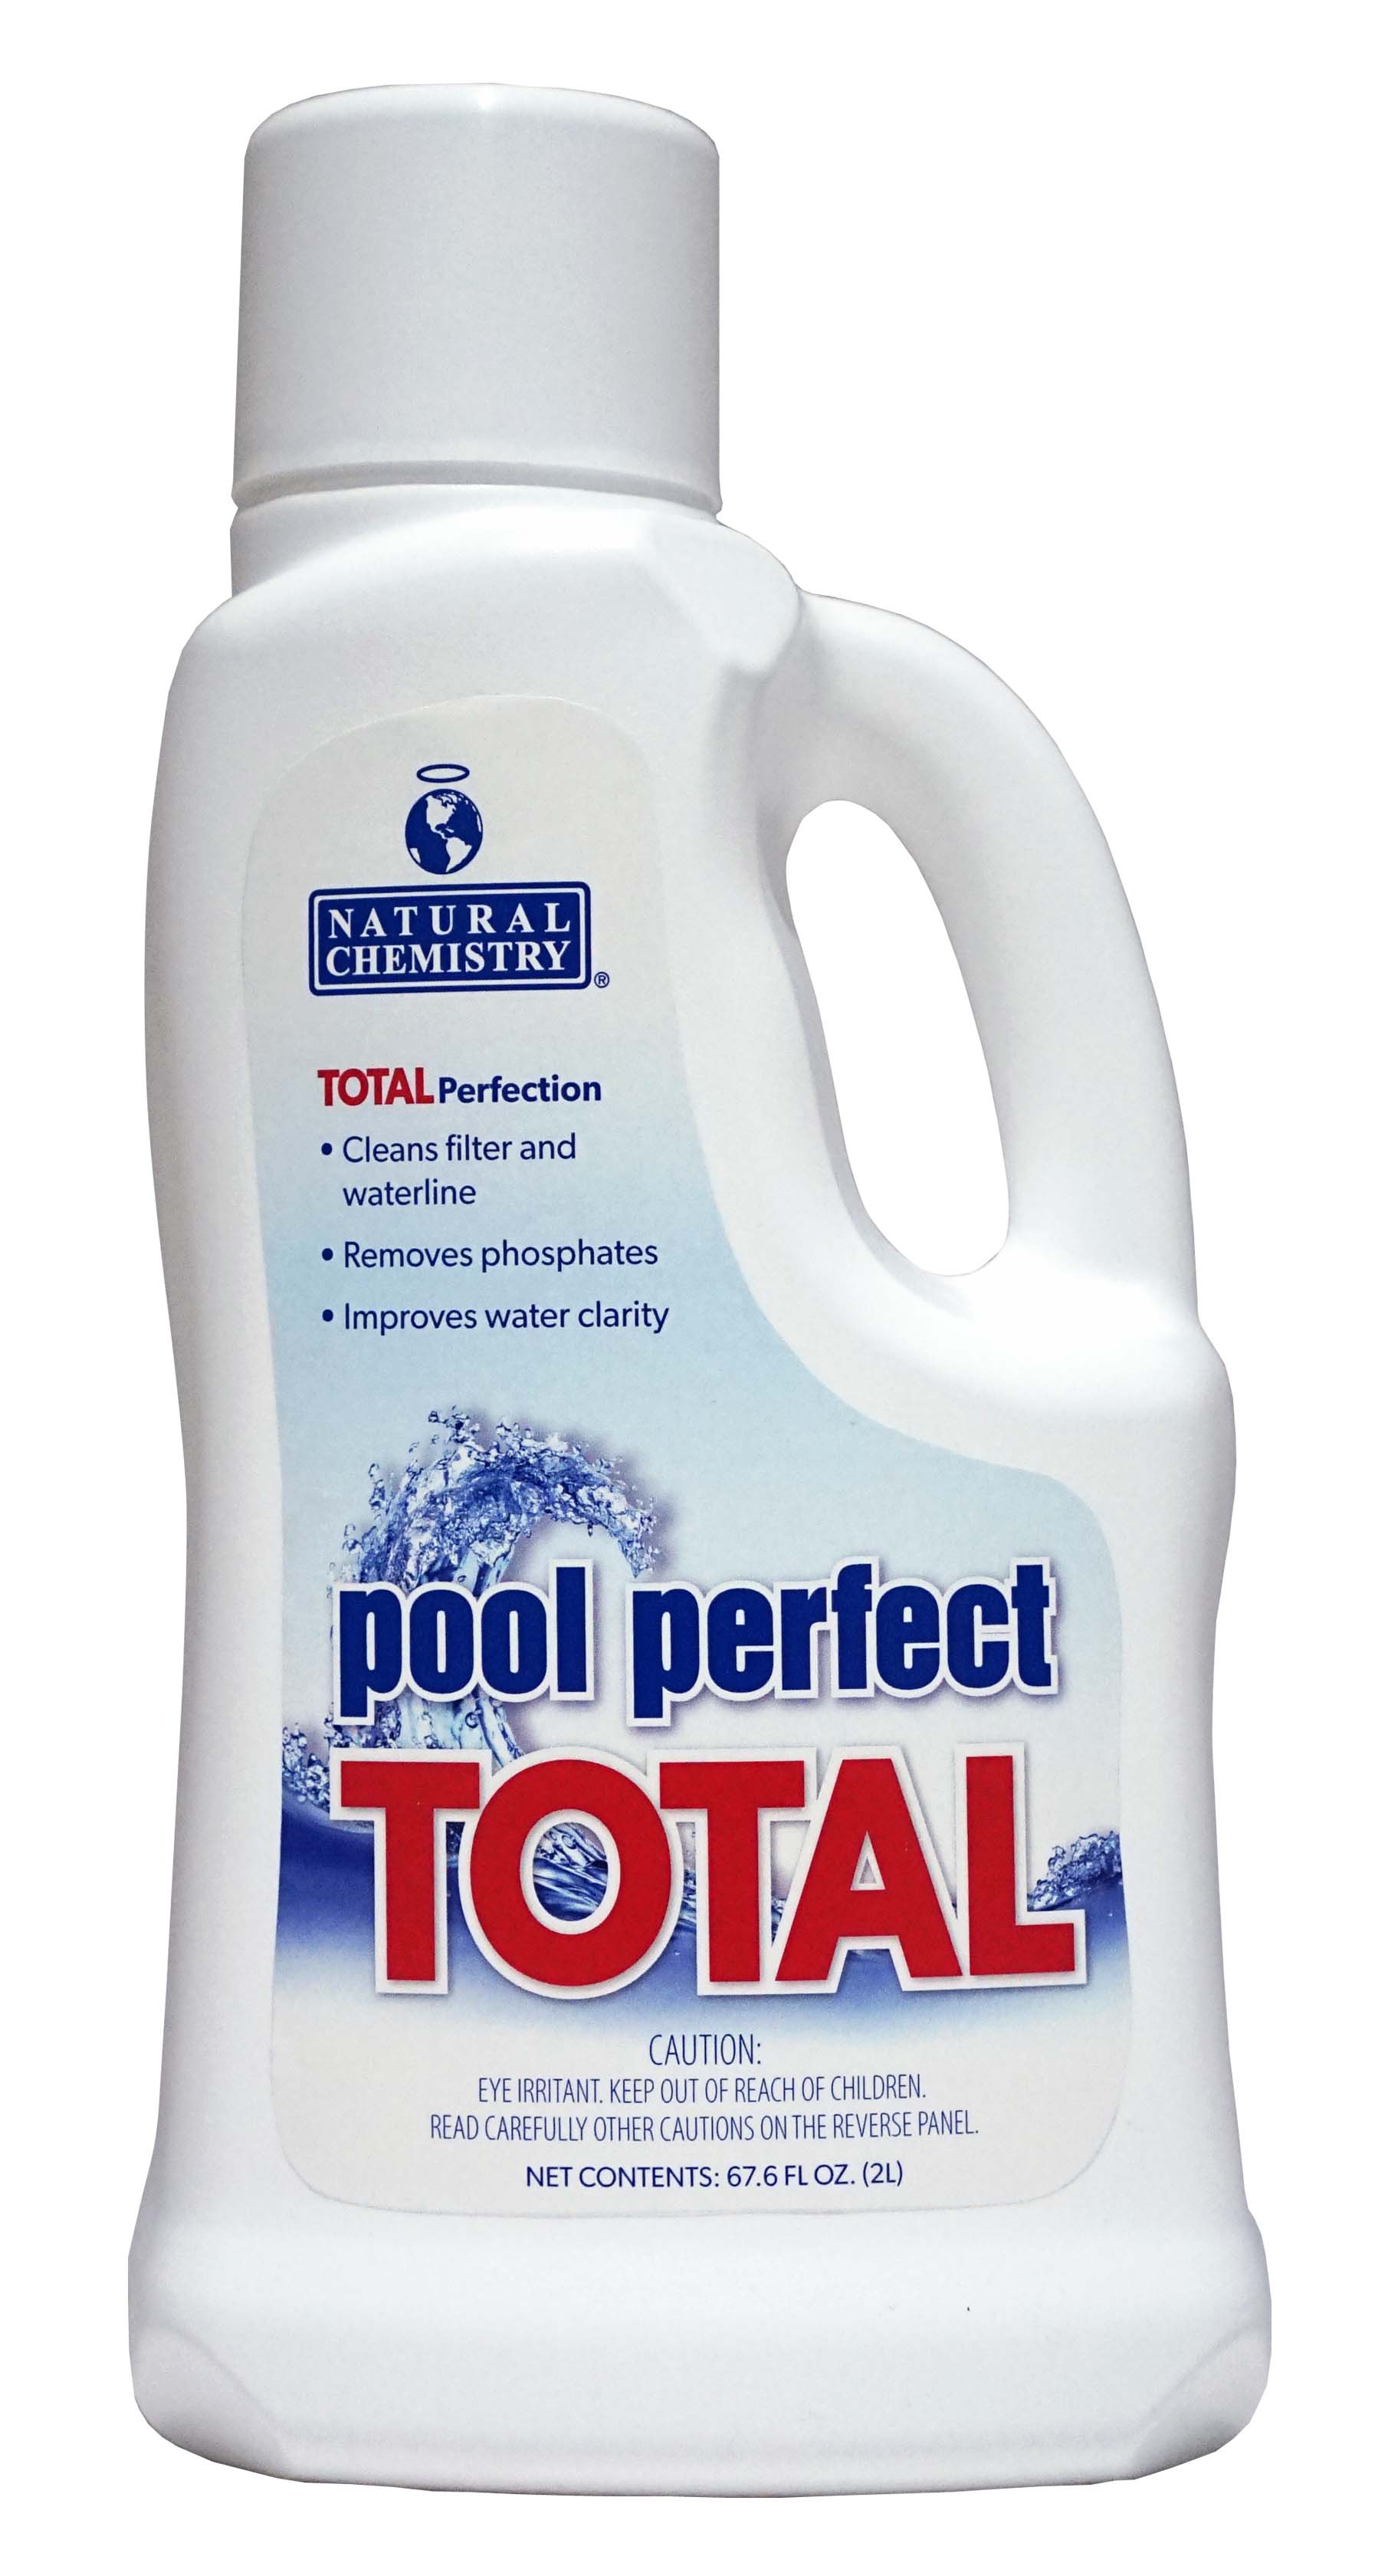 Pool Perfect Total 2 Liter X 6 Per Case - SPECIALTY CHEMICALS